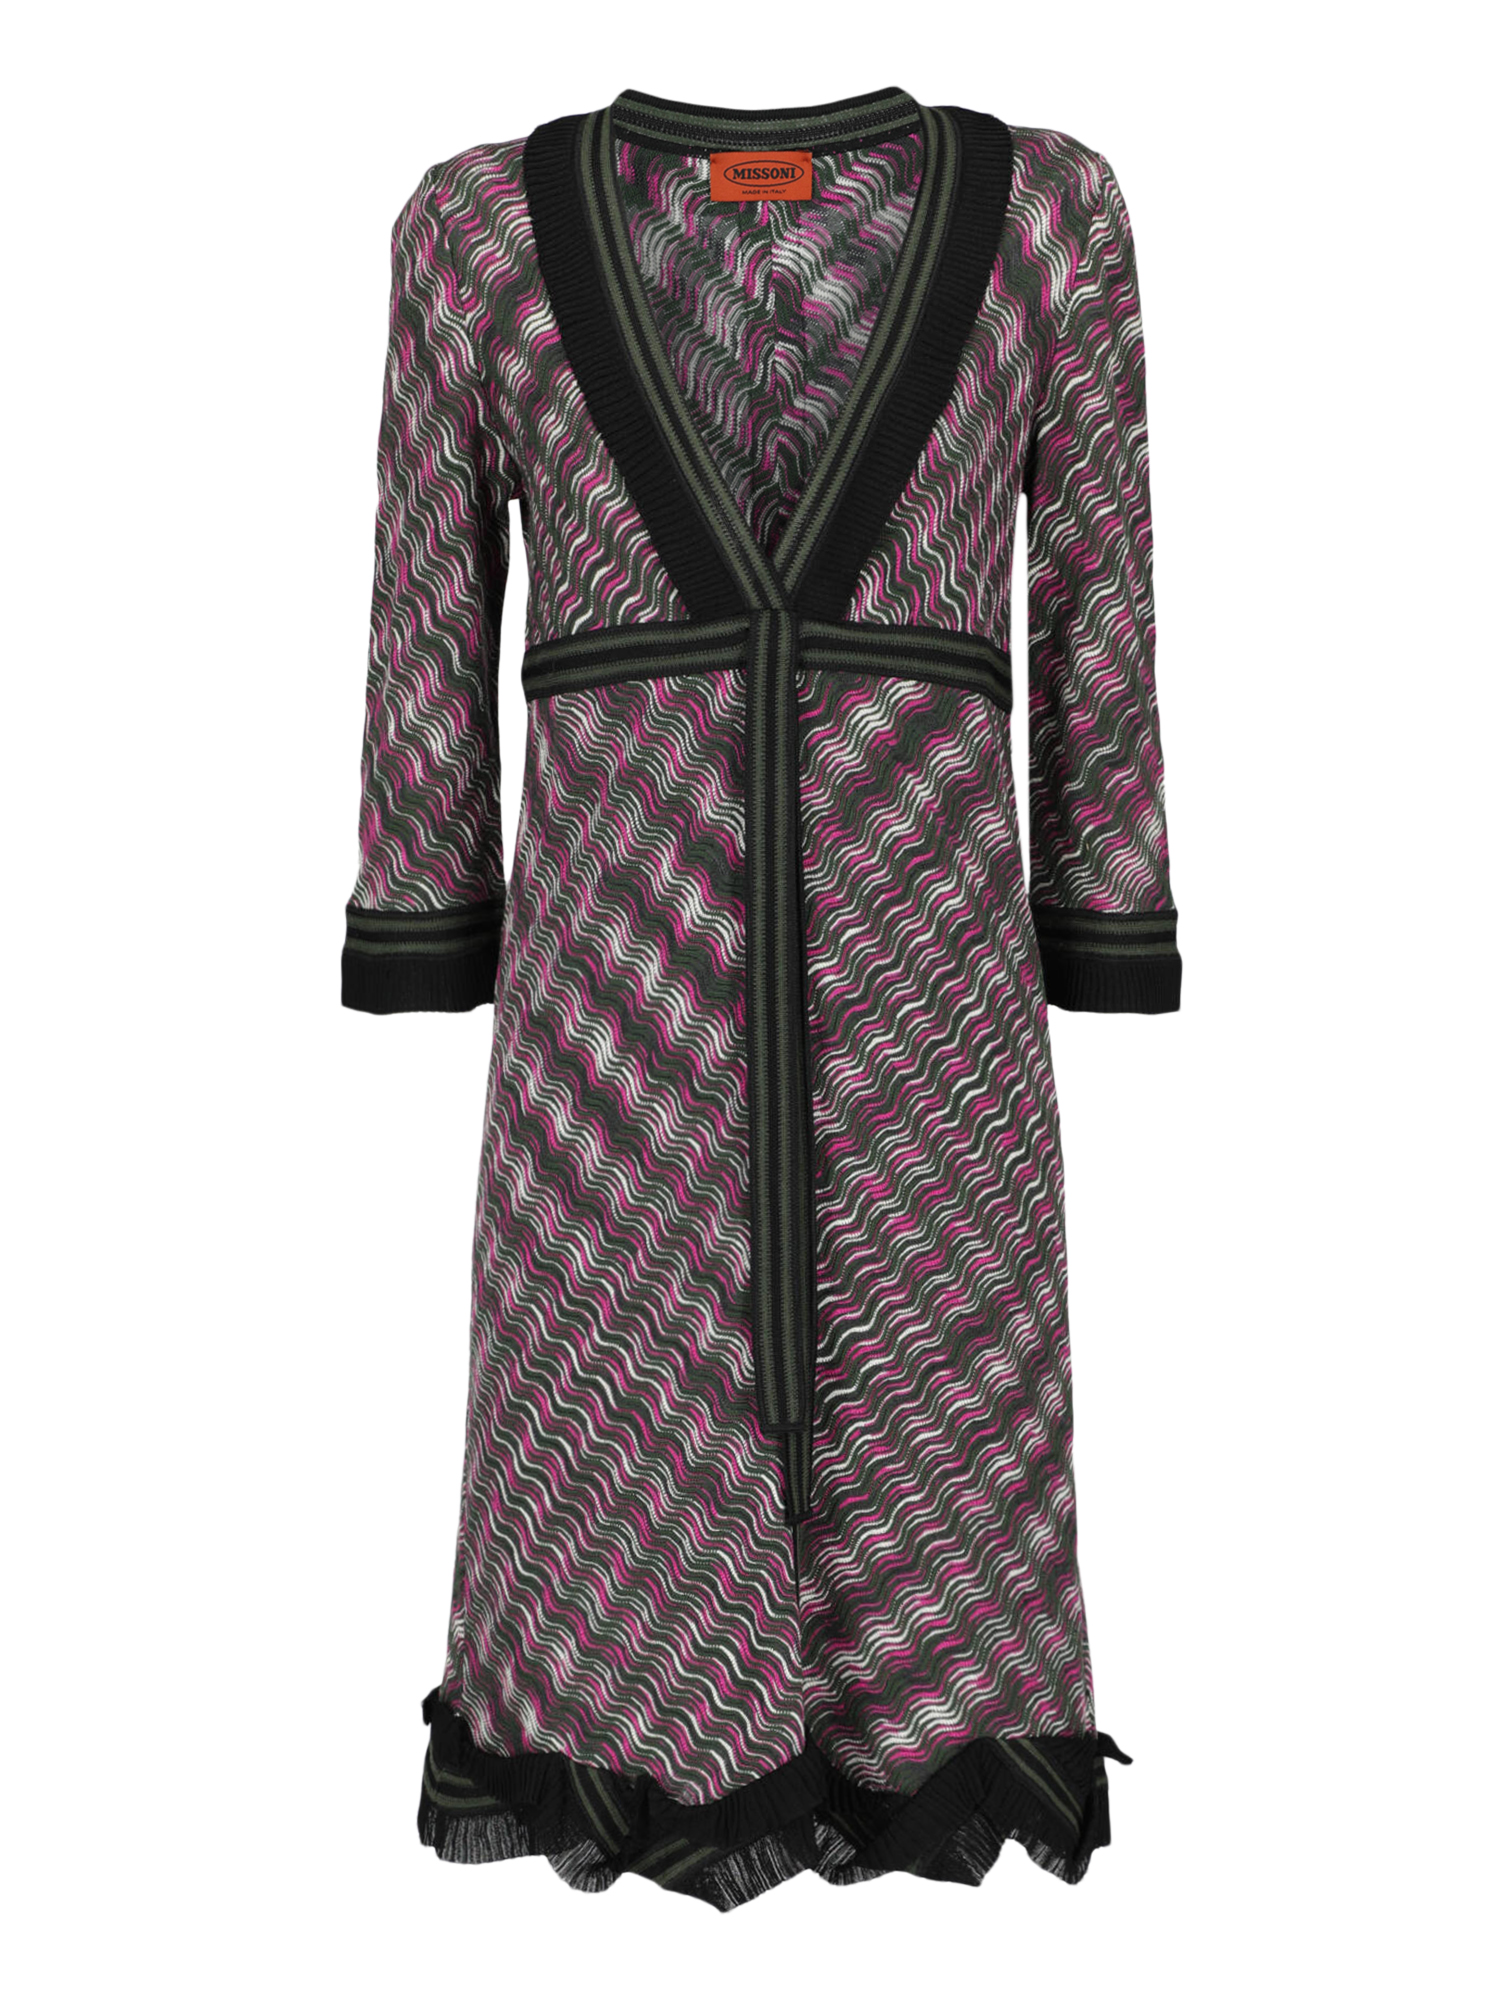 Pre-owned Missoni Women's Dresses -  - In Black, Green, Pink M